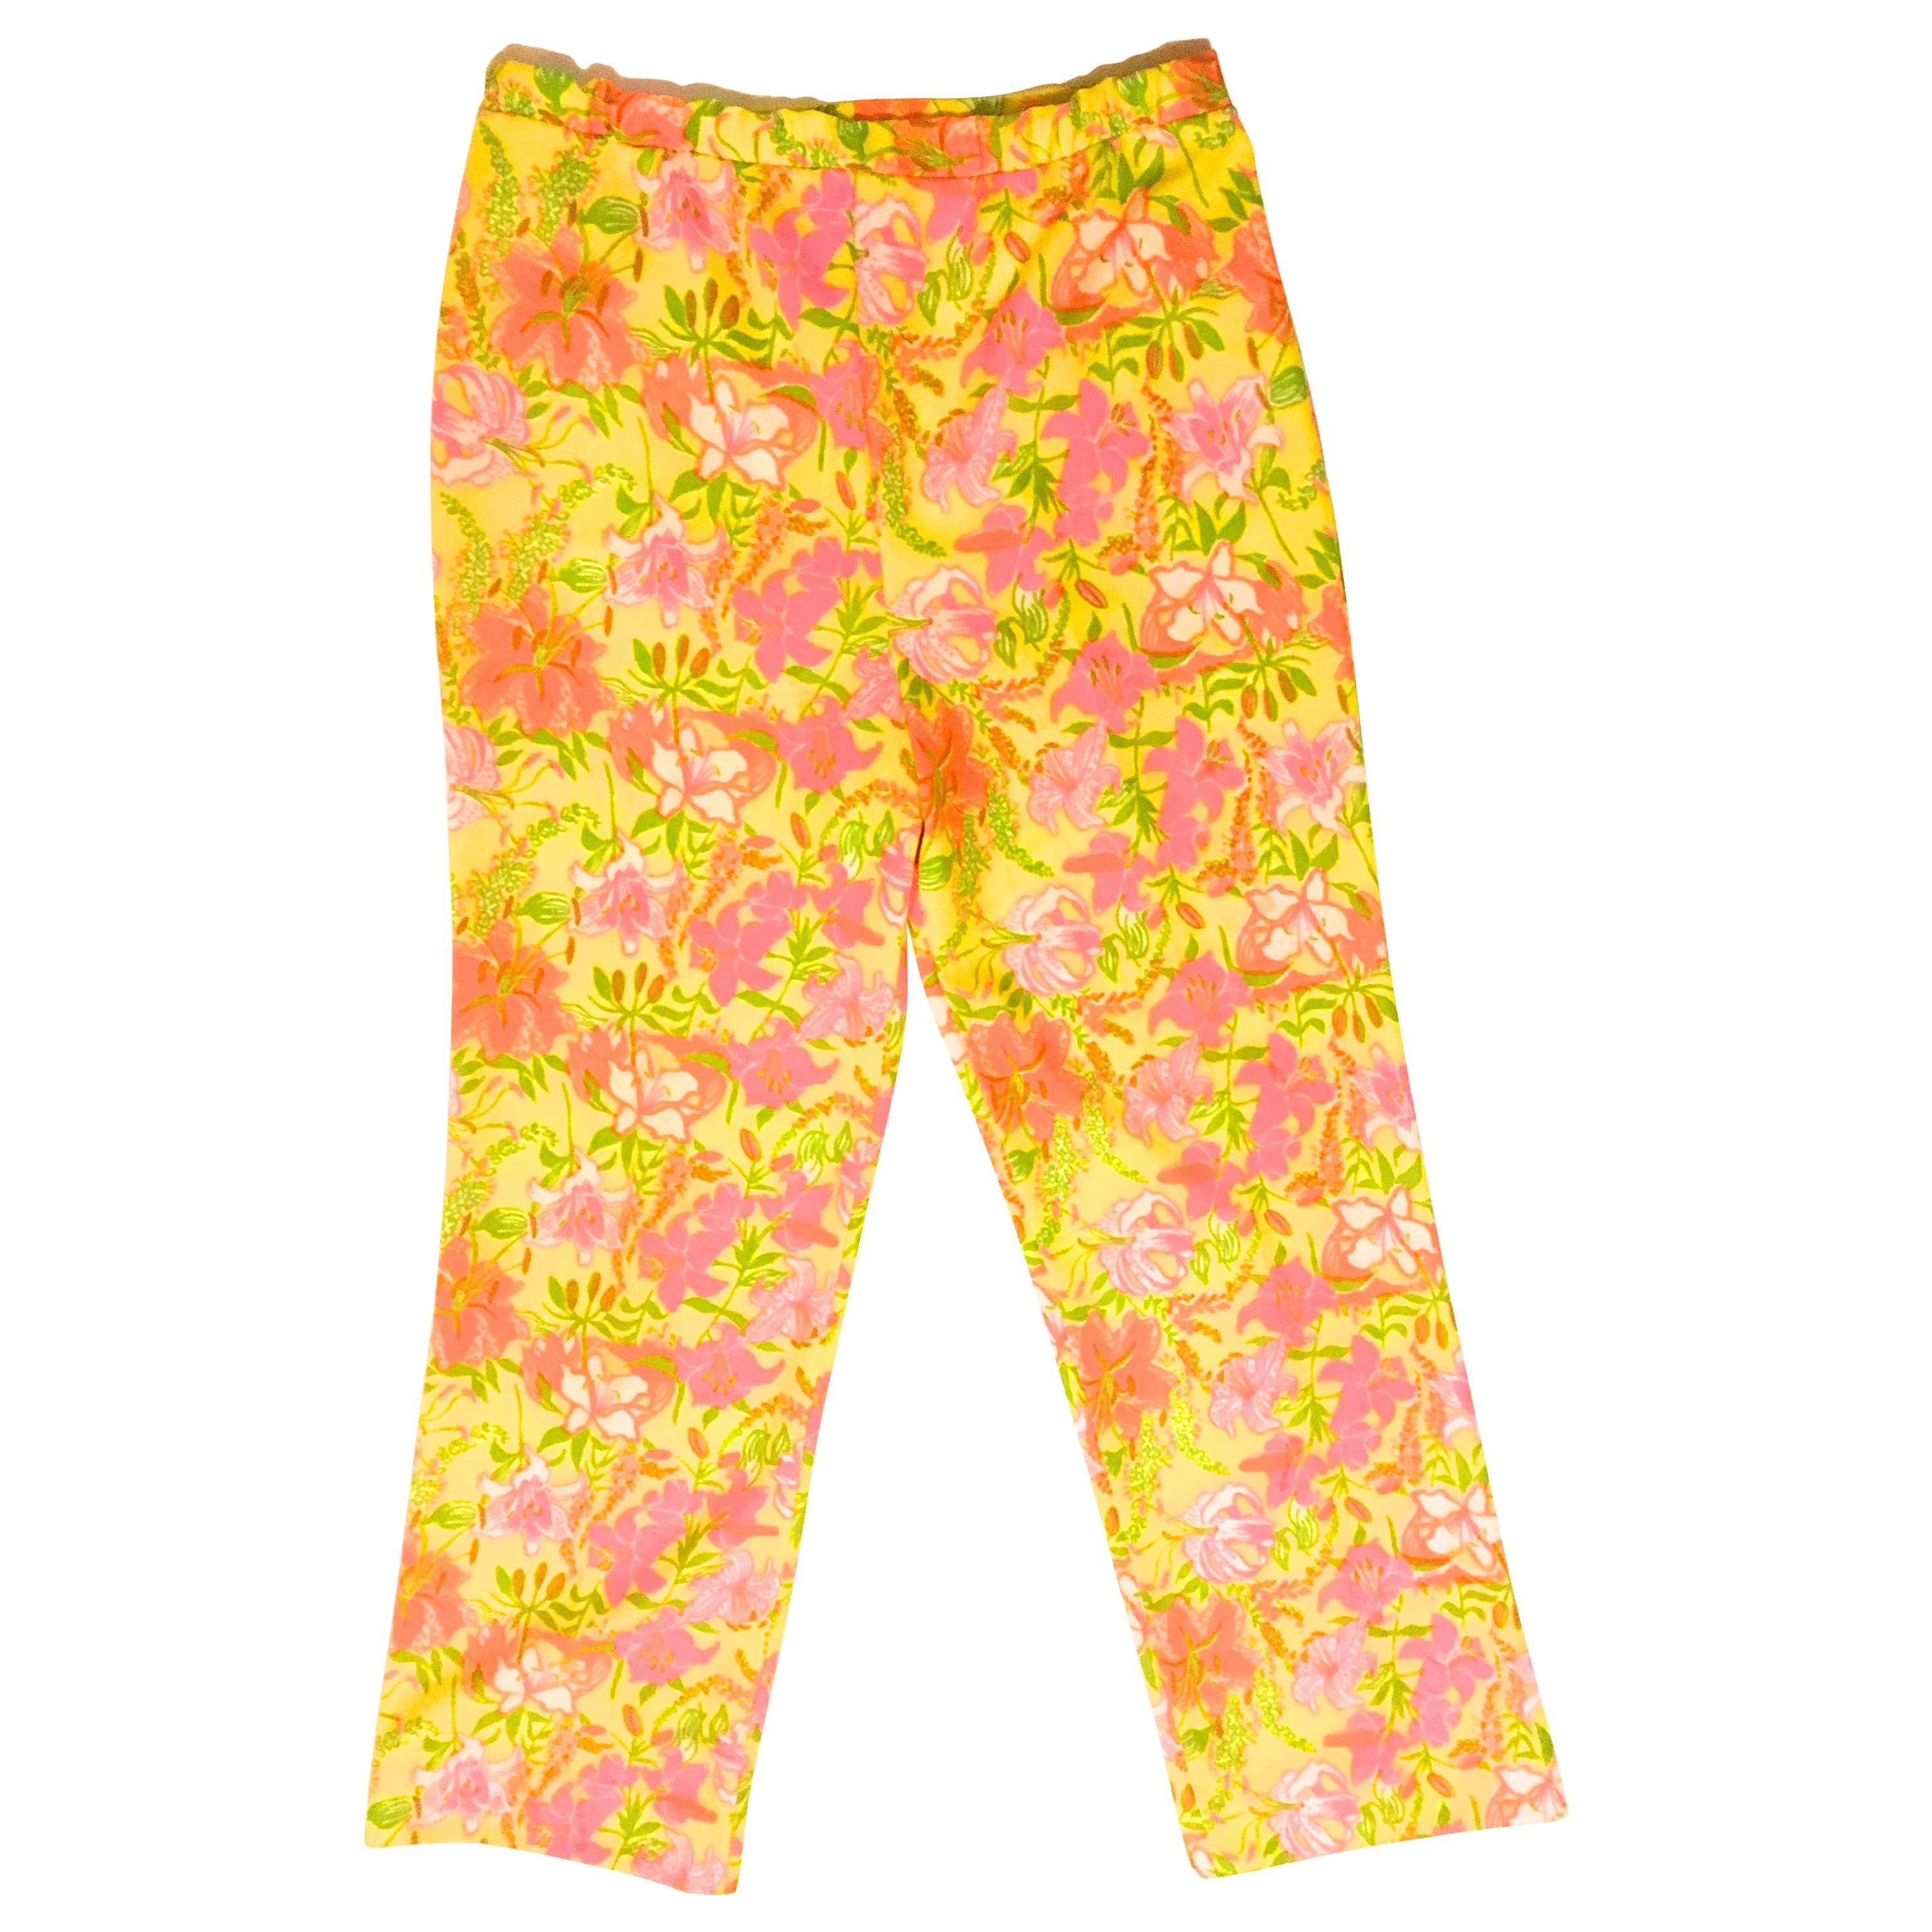 Rare Lilly Pulitzer Pull-up Pants - Late 1960's For Sale